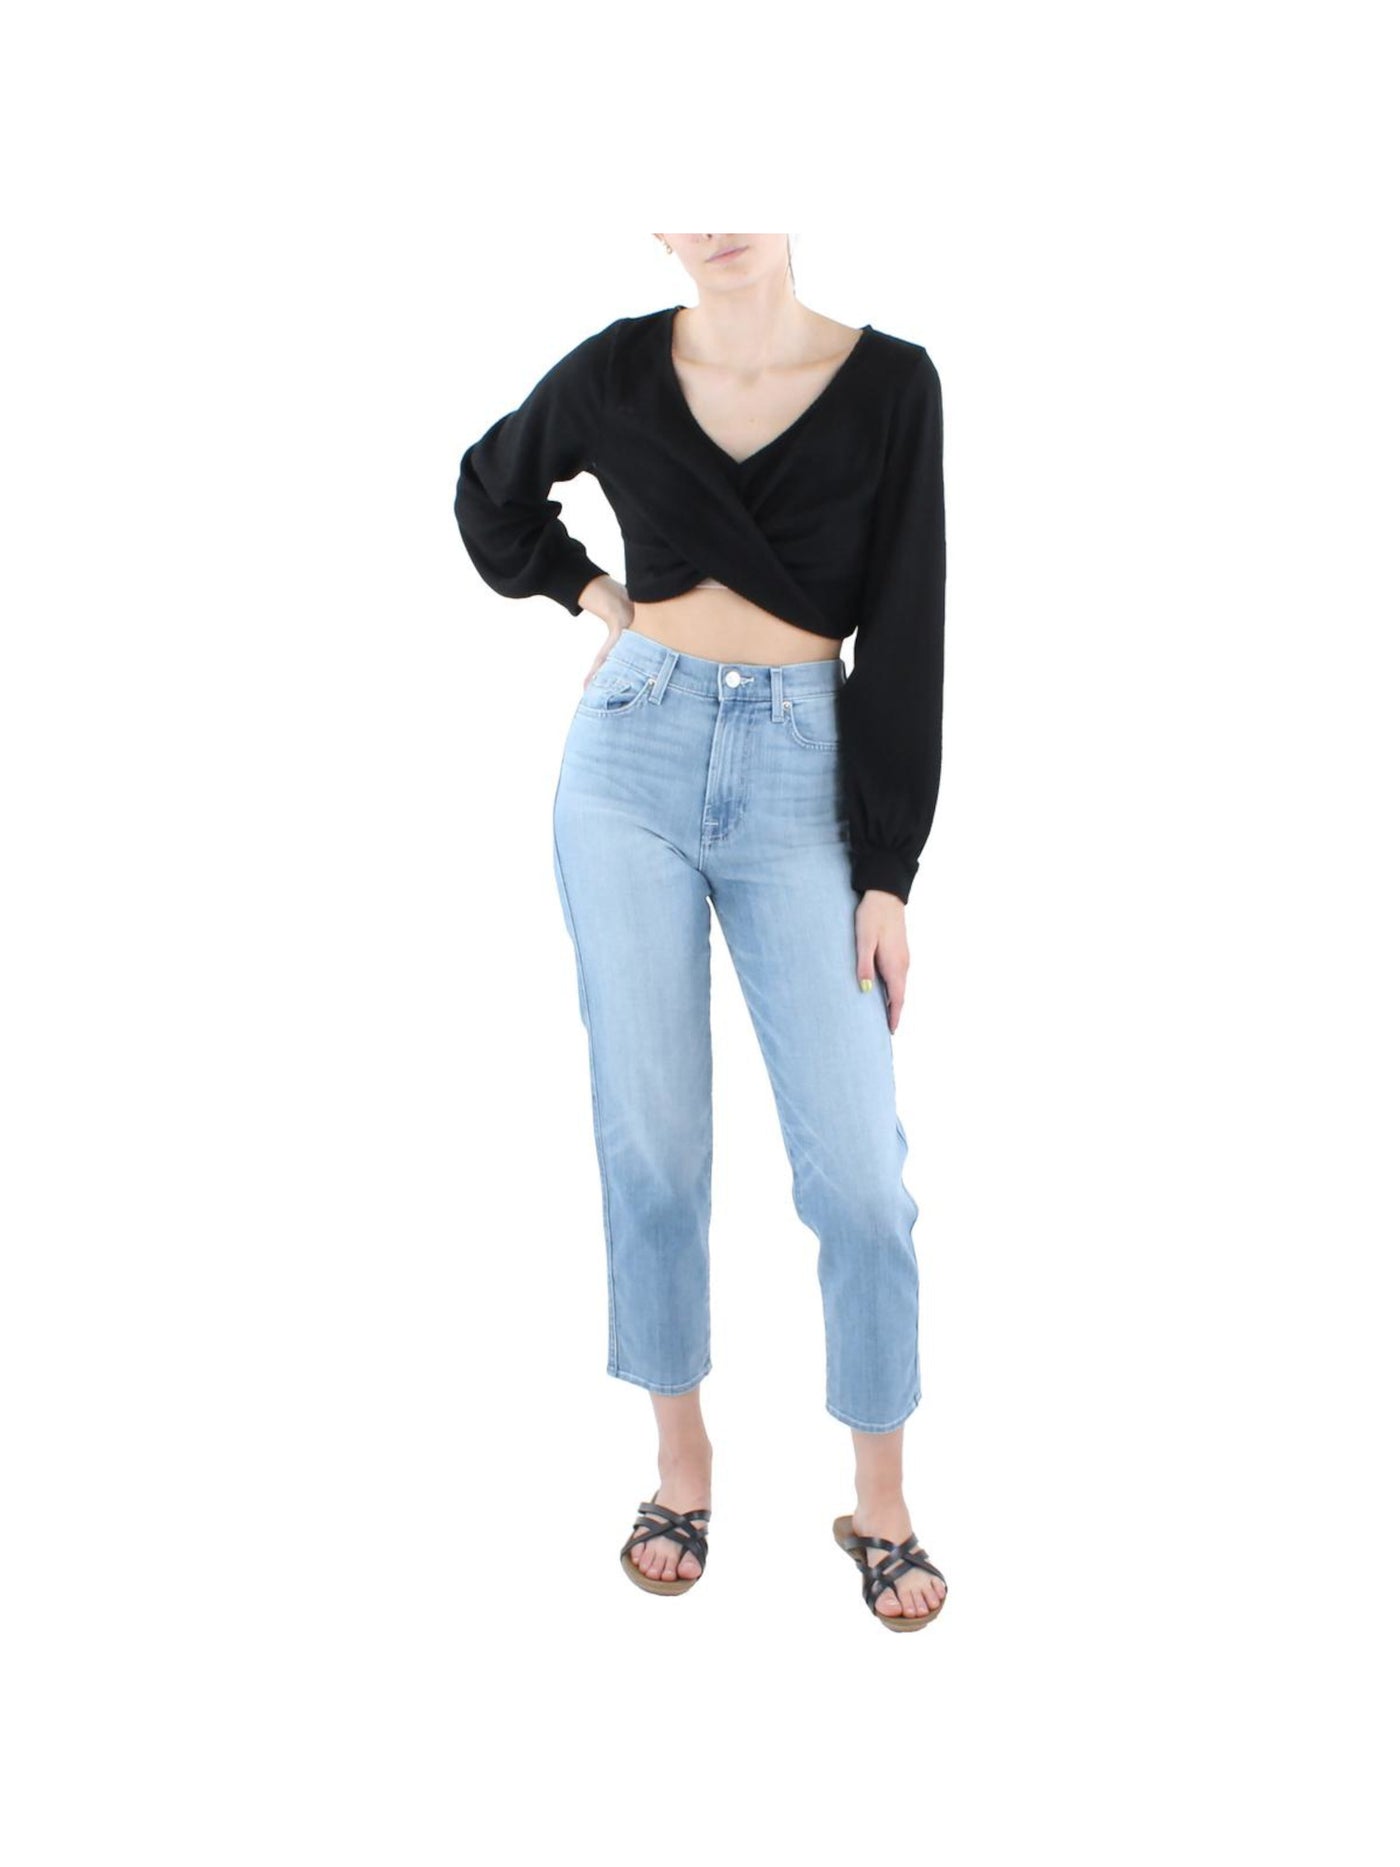 ALMOST FAMOUS Womens Black Ribbed Twist Front Long Sleeve V Neck Crop Top Sweater Juniors M